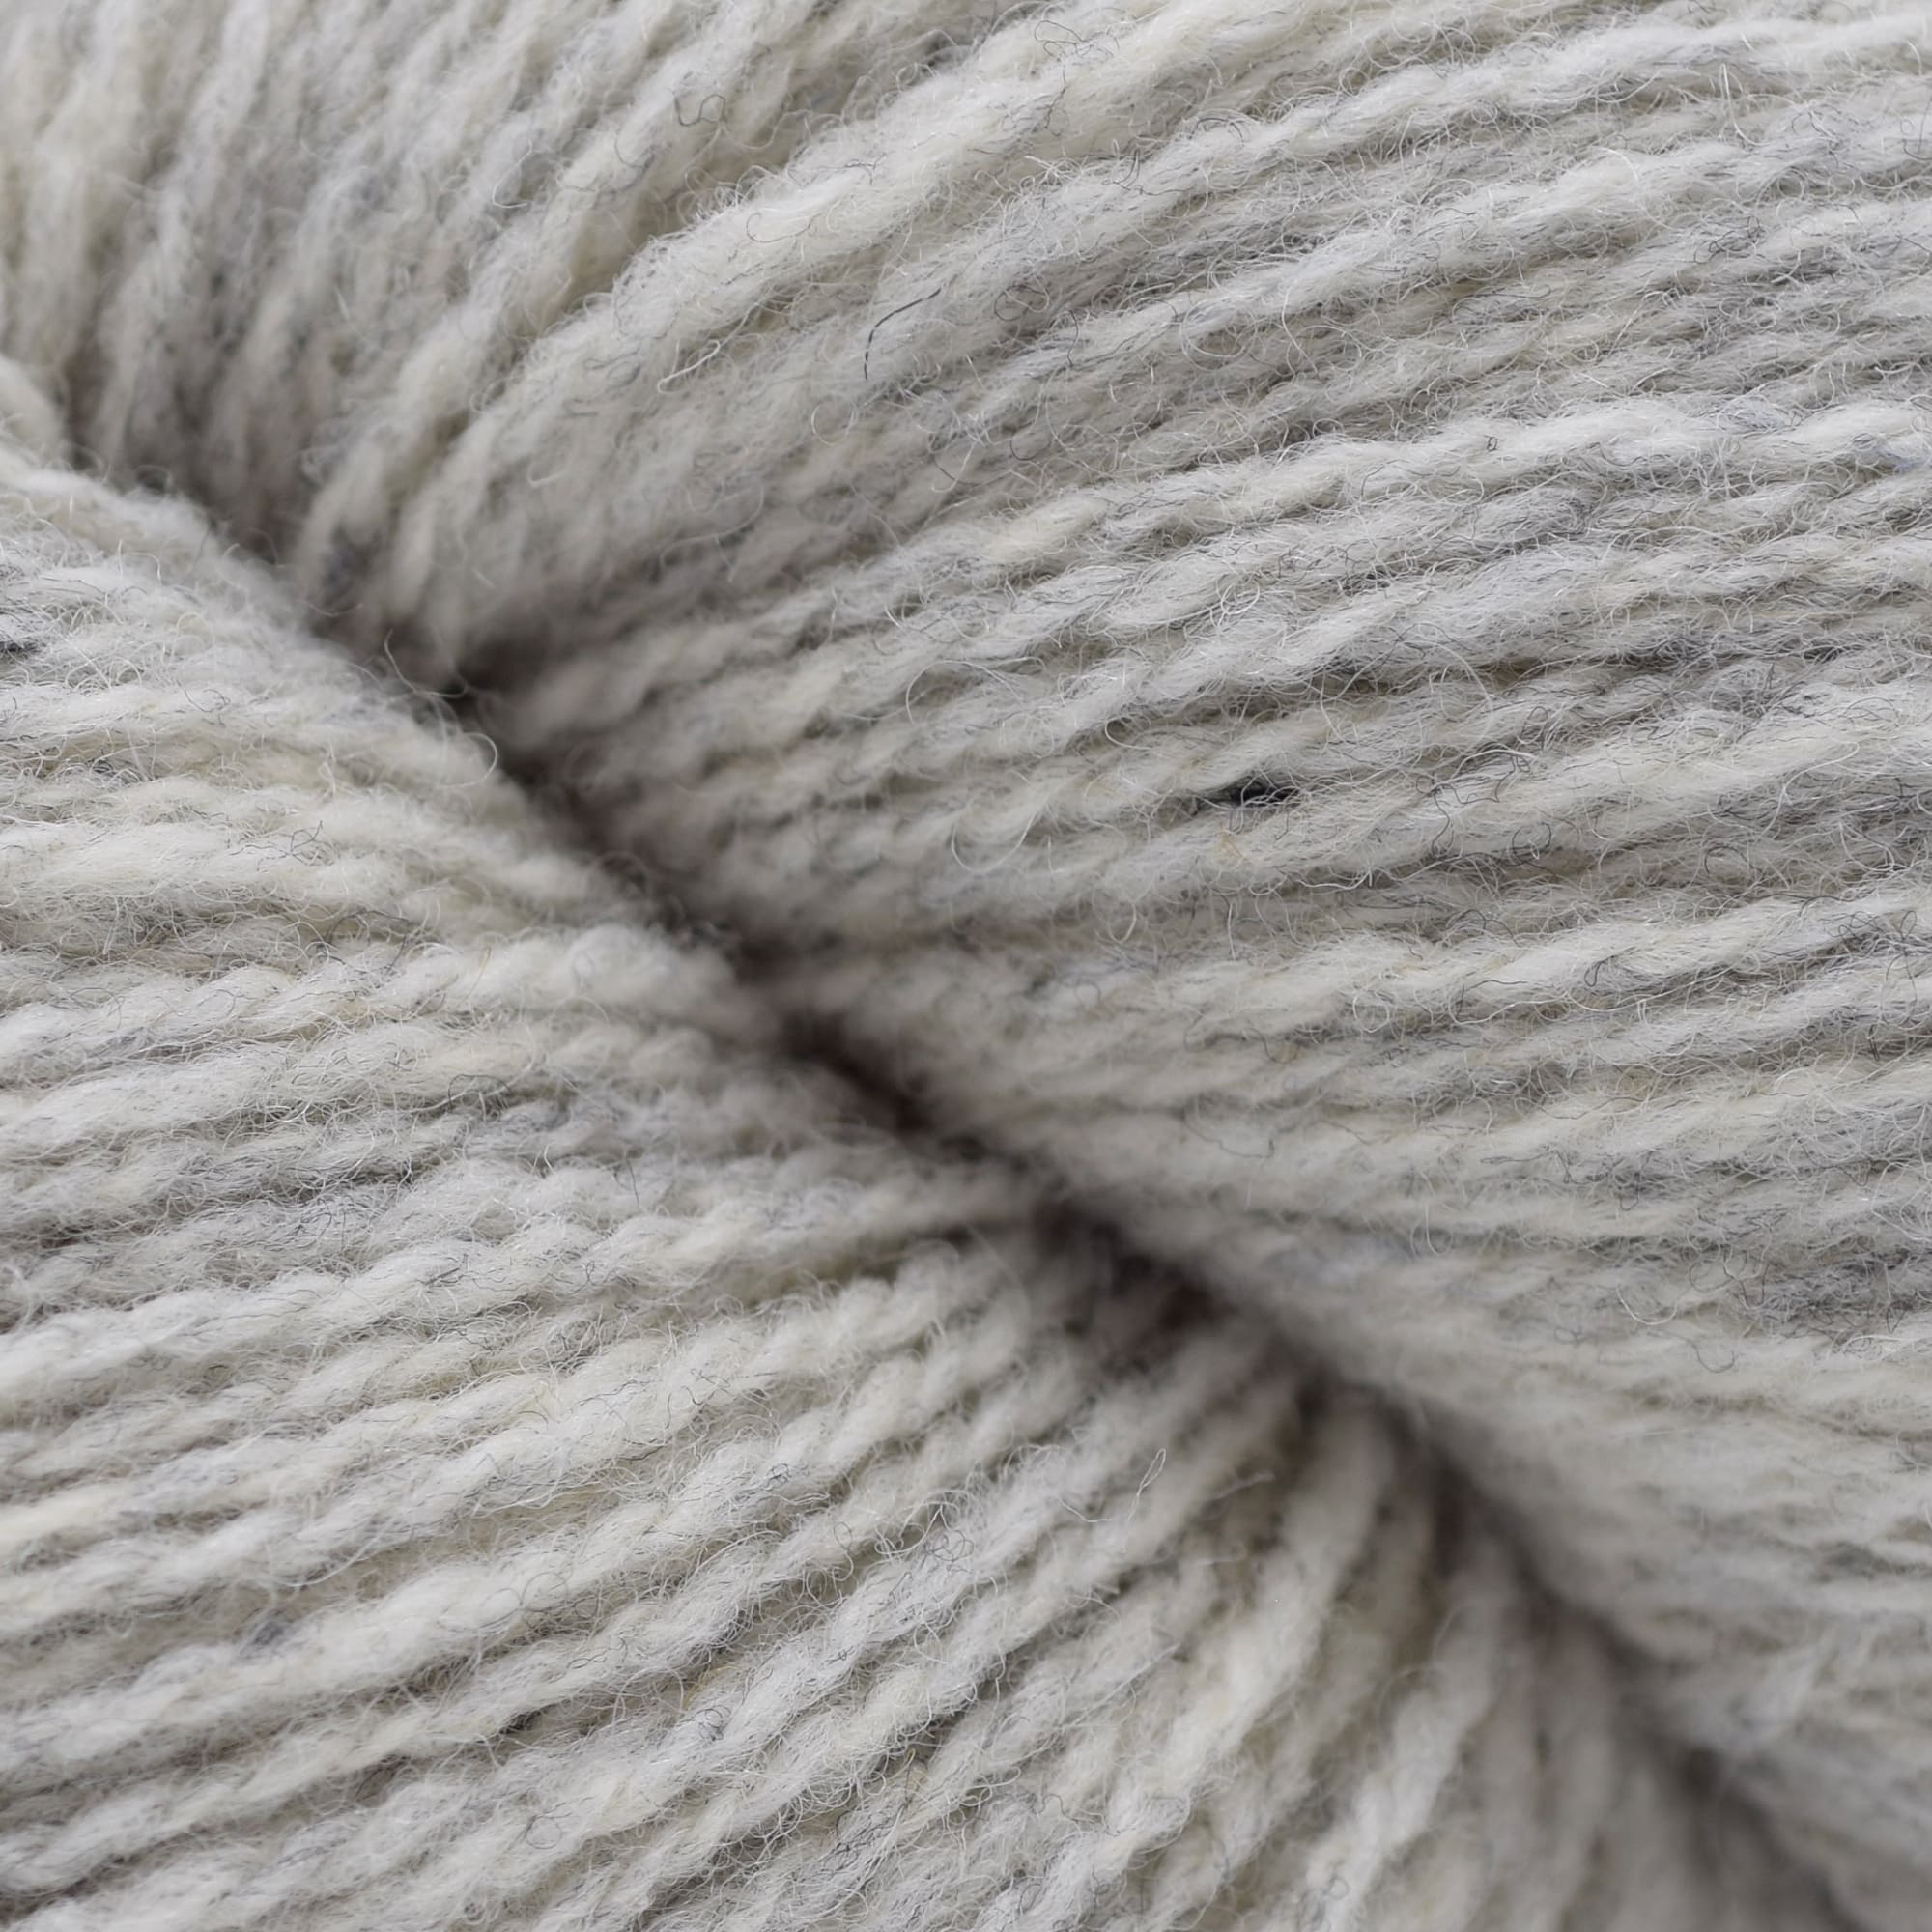 Unger Aloha Chunky Yarn - Shades of Grey, Brown & White - New